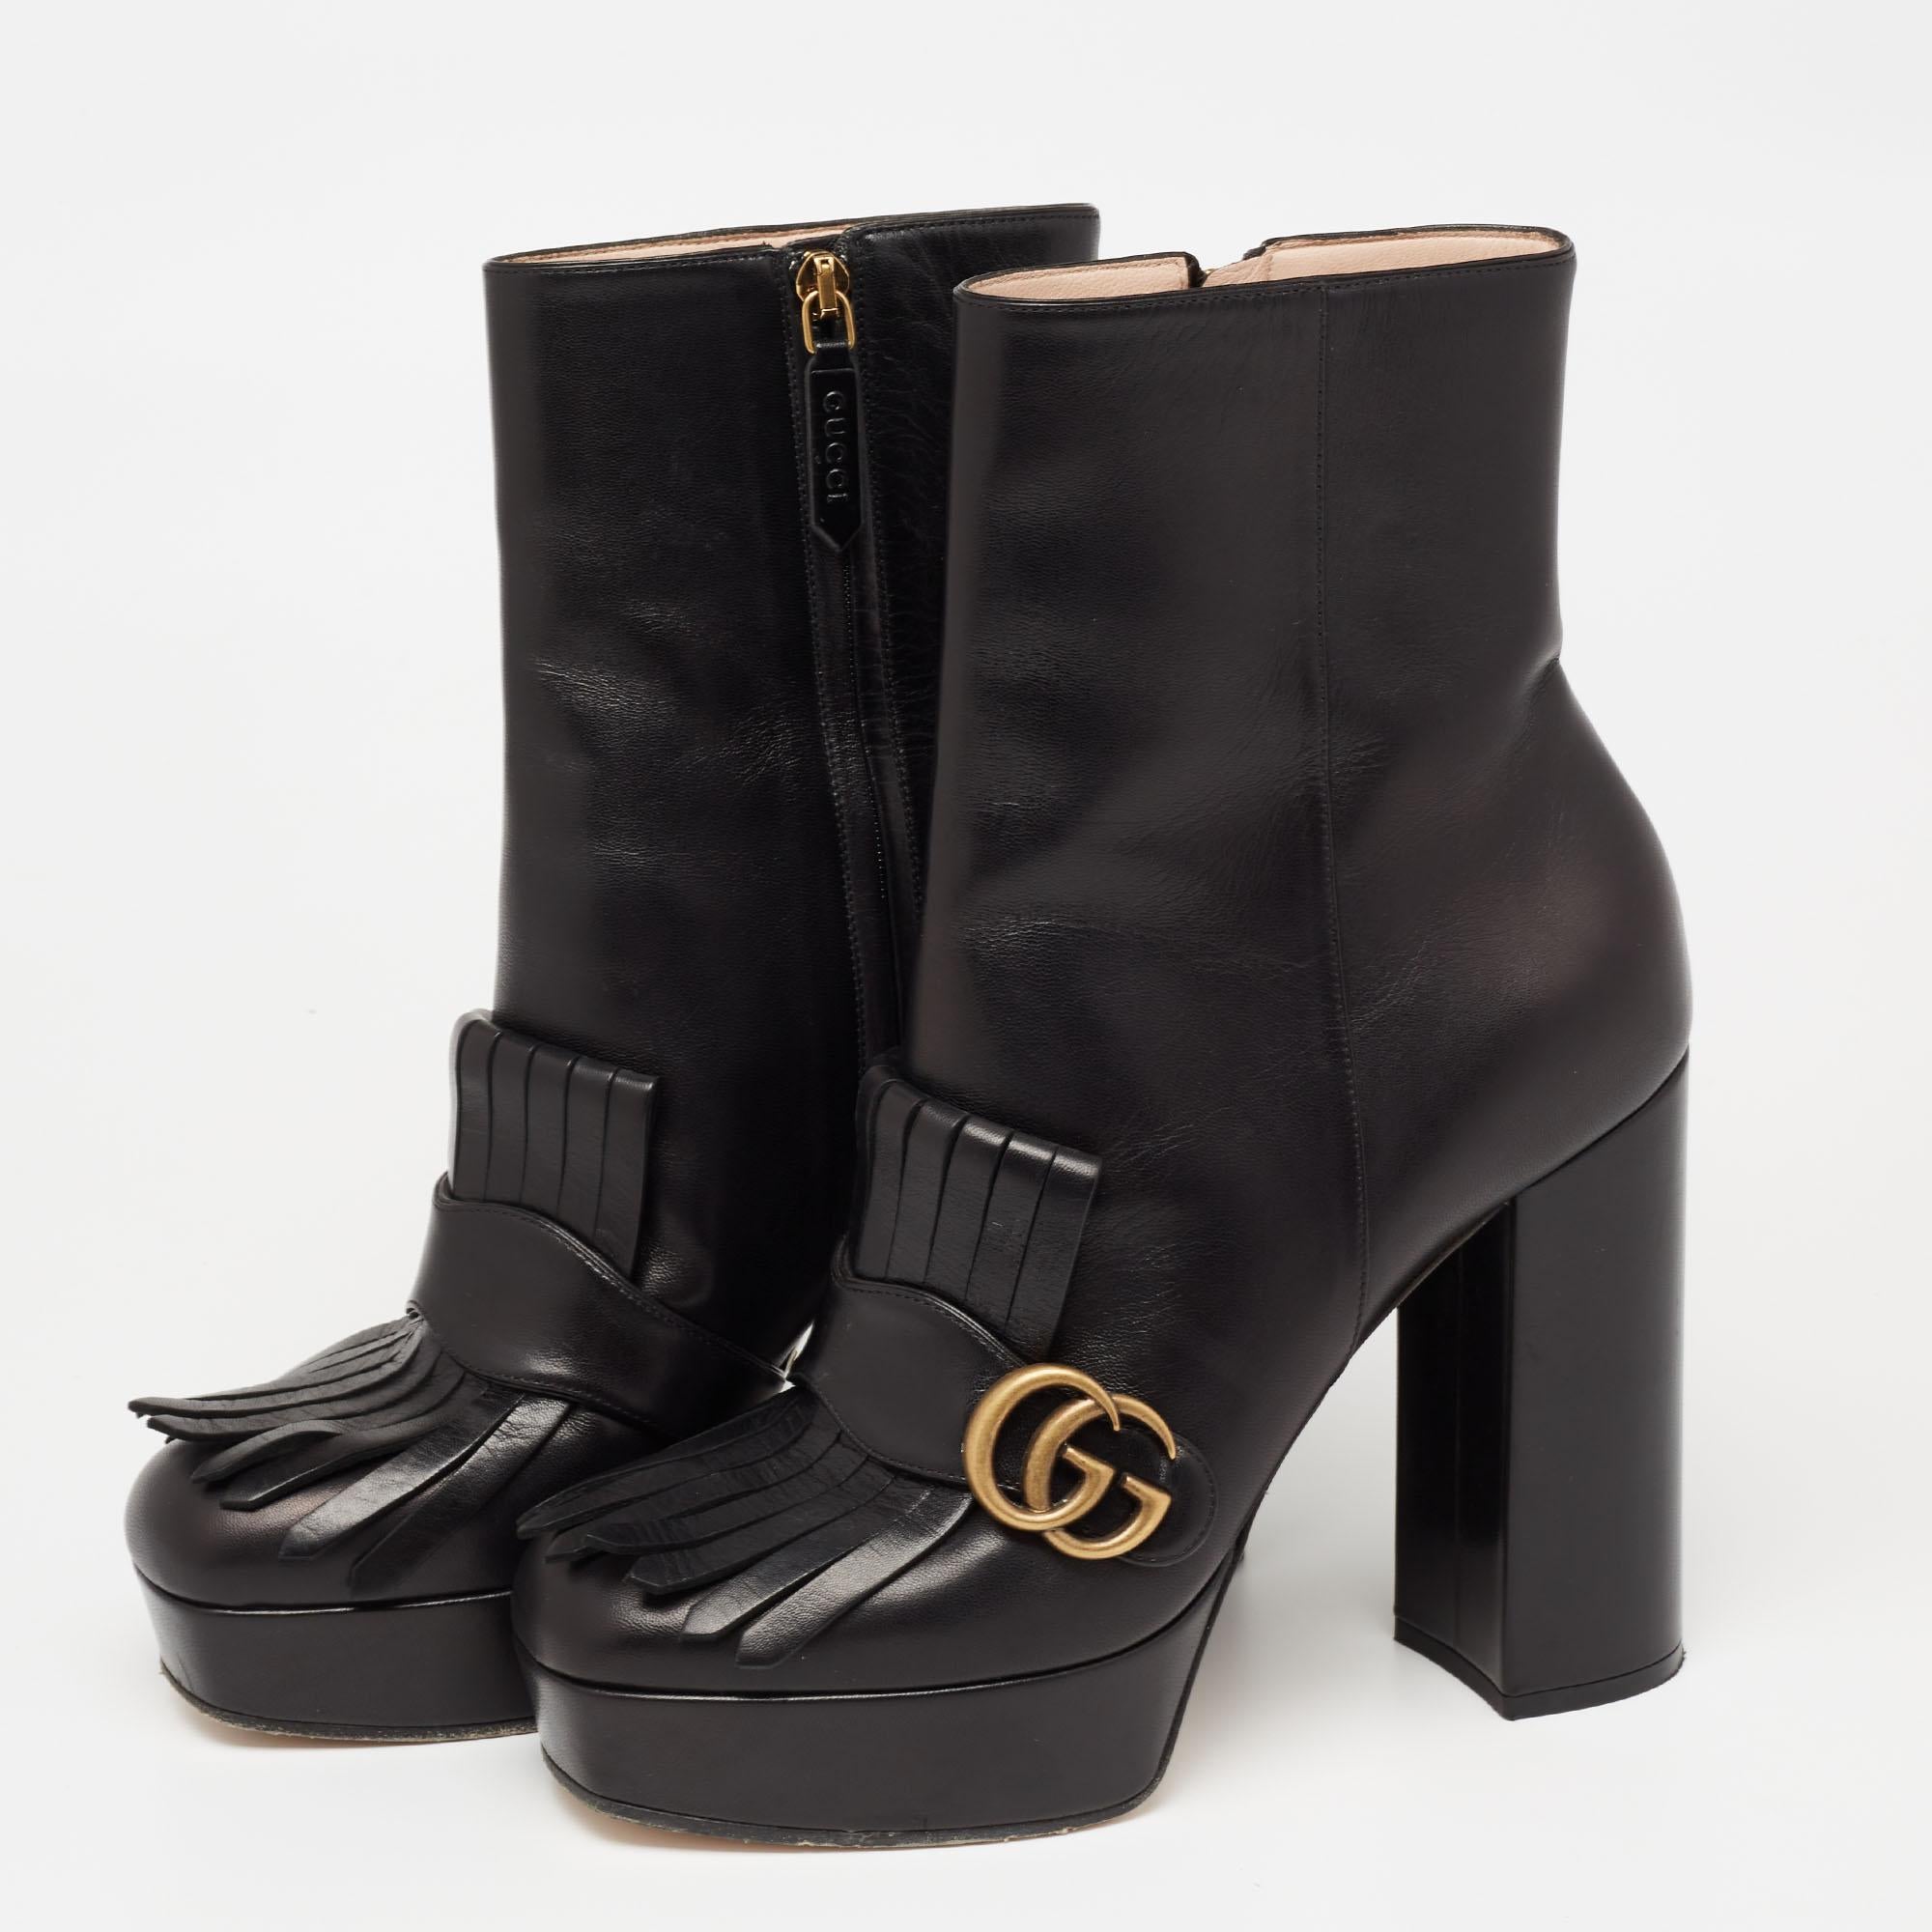 Indulge yourself in a luxurious experience with these Gucci boots. A perfect stylish accessory, they come made from black leather and flaunt side zipper closure. The interlocking 'GG' motif on the folded fringe acts as a recognizable sign-off and